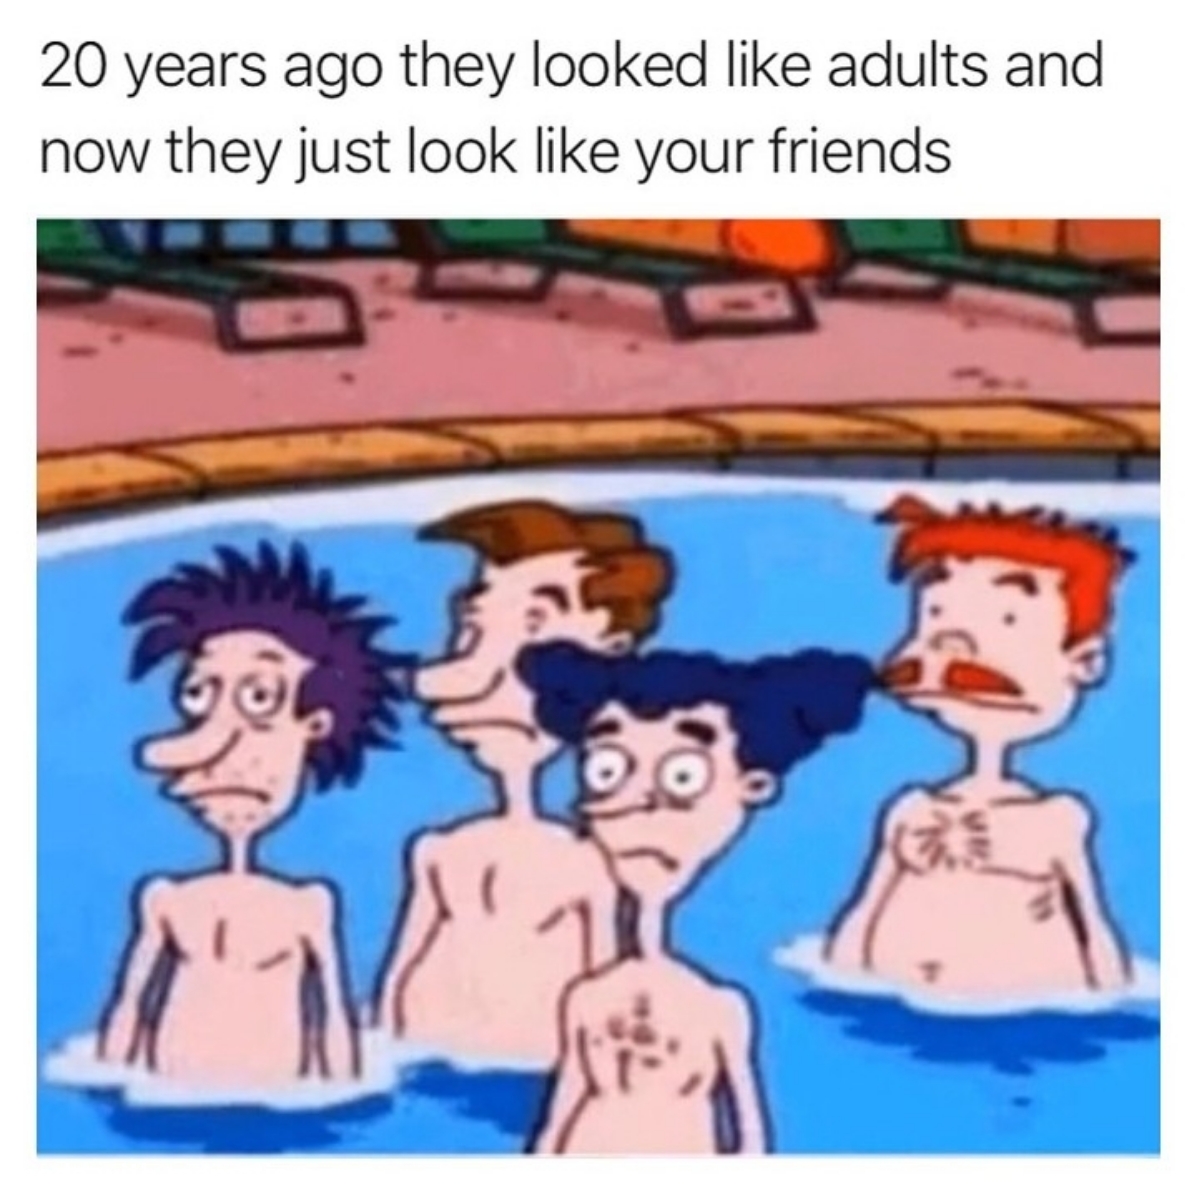 dank memes - funny memes - 20 years ago they looked like adults - 20 years ago they looked adults and now they just look your friends